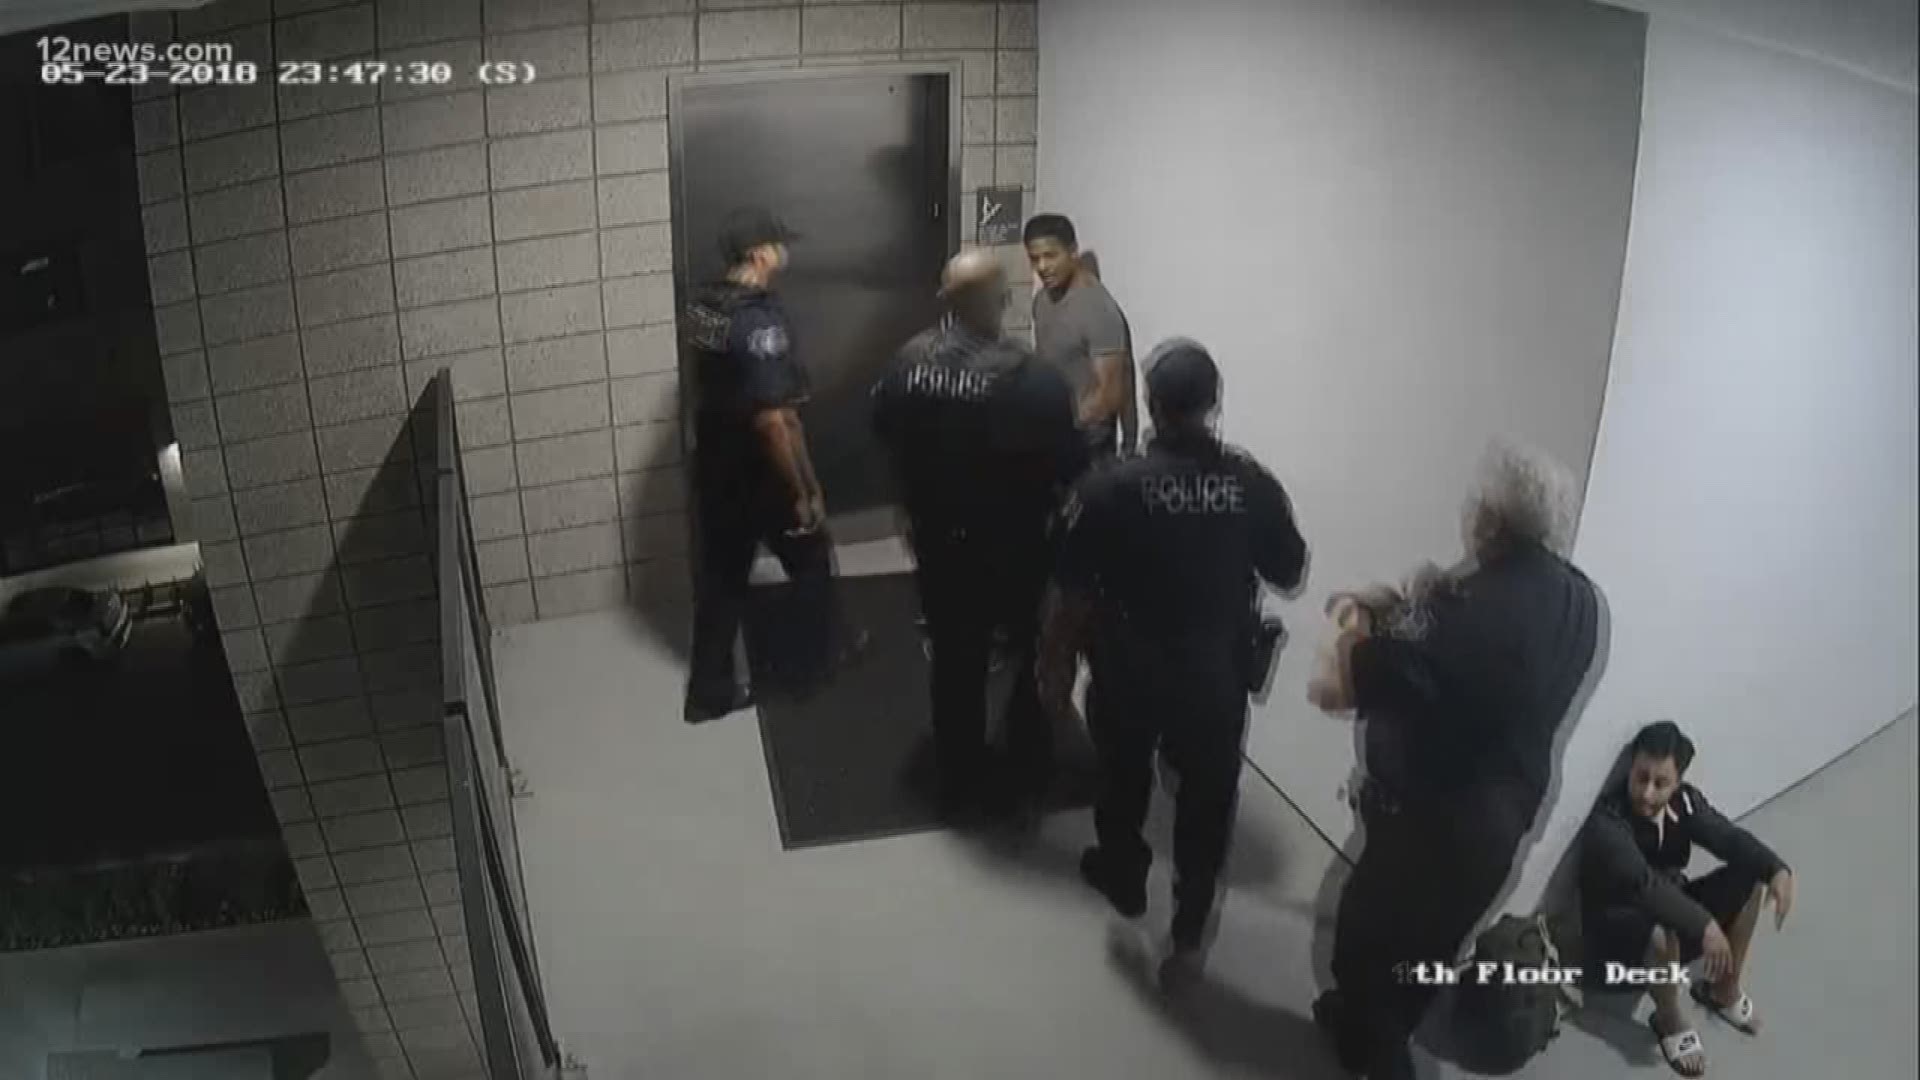 The investigations stem from May 2018, where security cameras show officers hitting and punching a man in the face in an apartment complex hallway. The investigations found the officers did not violate criminal law.